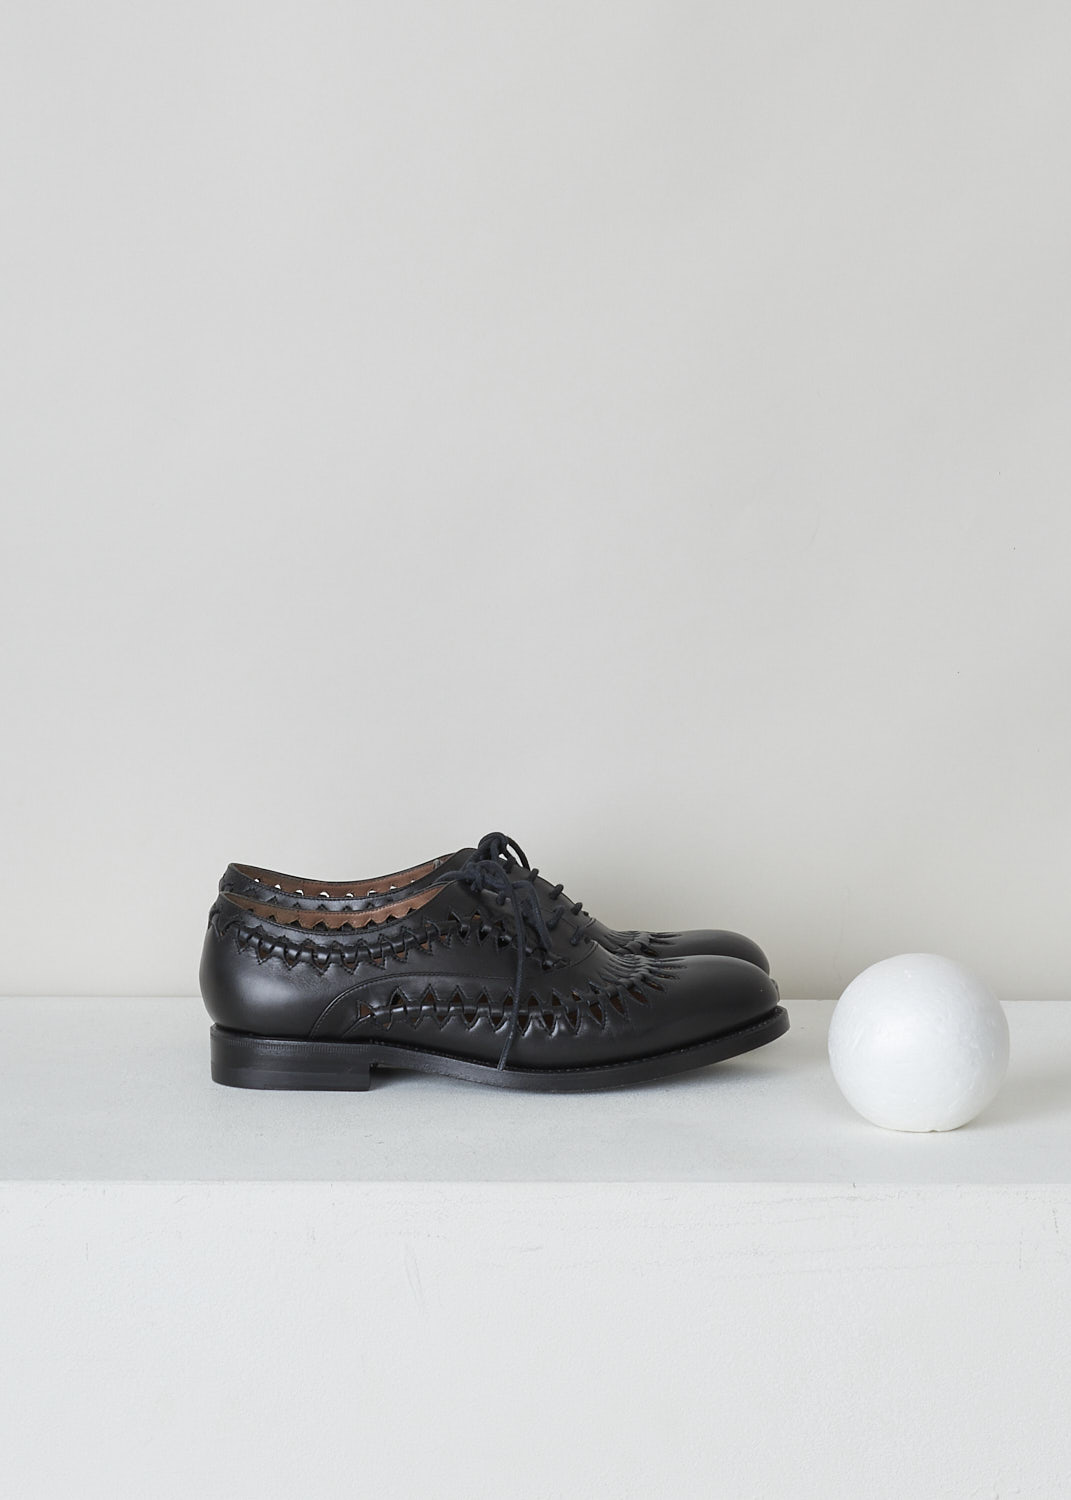 ALAÏA, BLACK OPENWORK DERBY SHOE, 4W3D128CB05_C999_NOIR, Black, Side, These black leather derby shoes have an intricate openwork laser-cut pattern. They have a round nose, a classic lace-up closing with black laces and a small heel. 

